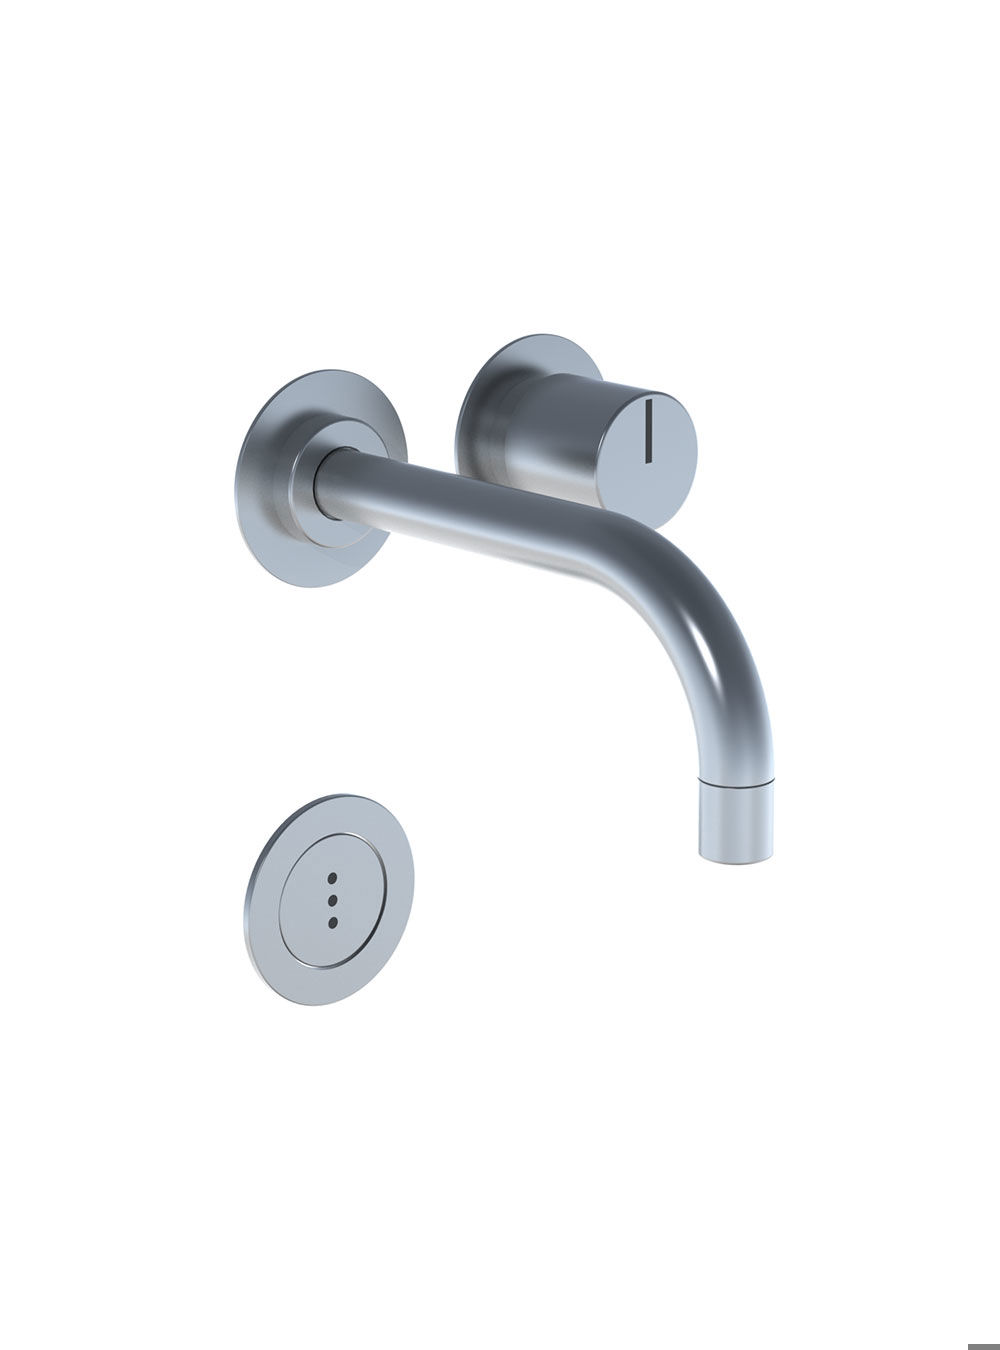 4911VSX: Build-in basin mixer with on-off sensor for ‘hands free’ operation. For vertical mounting. Sensor al